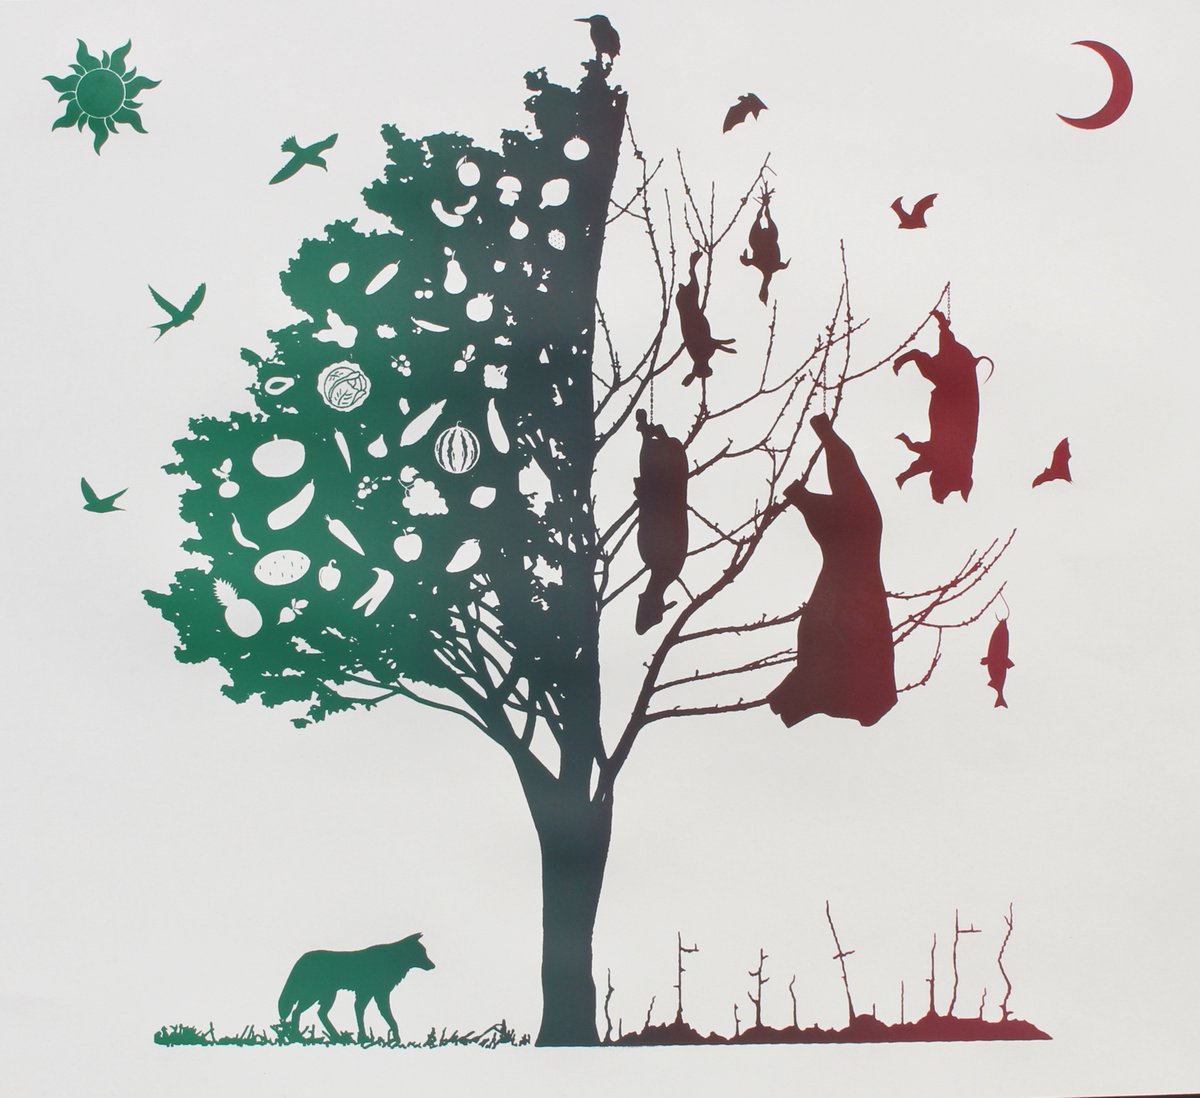 The Tree of Life and Death by Karen Fiorito